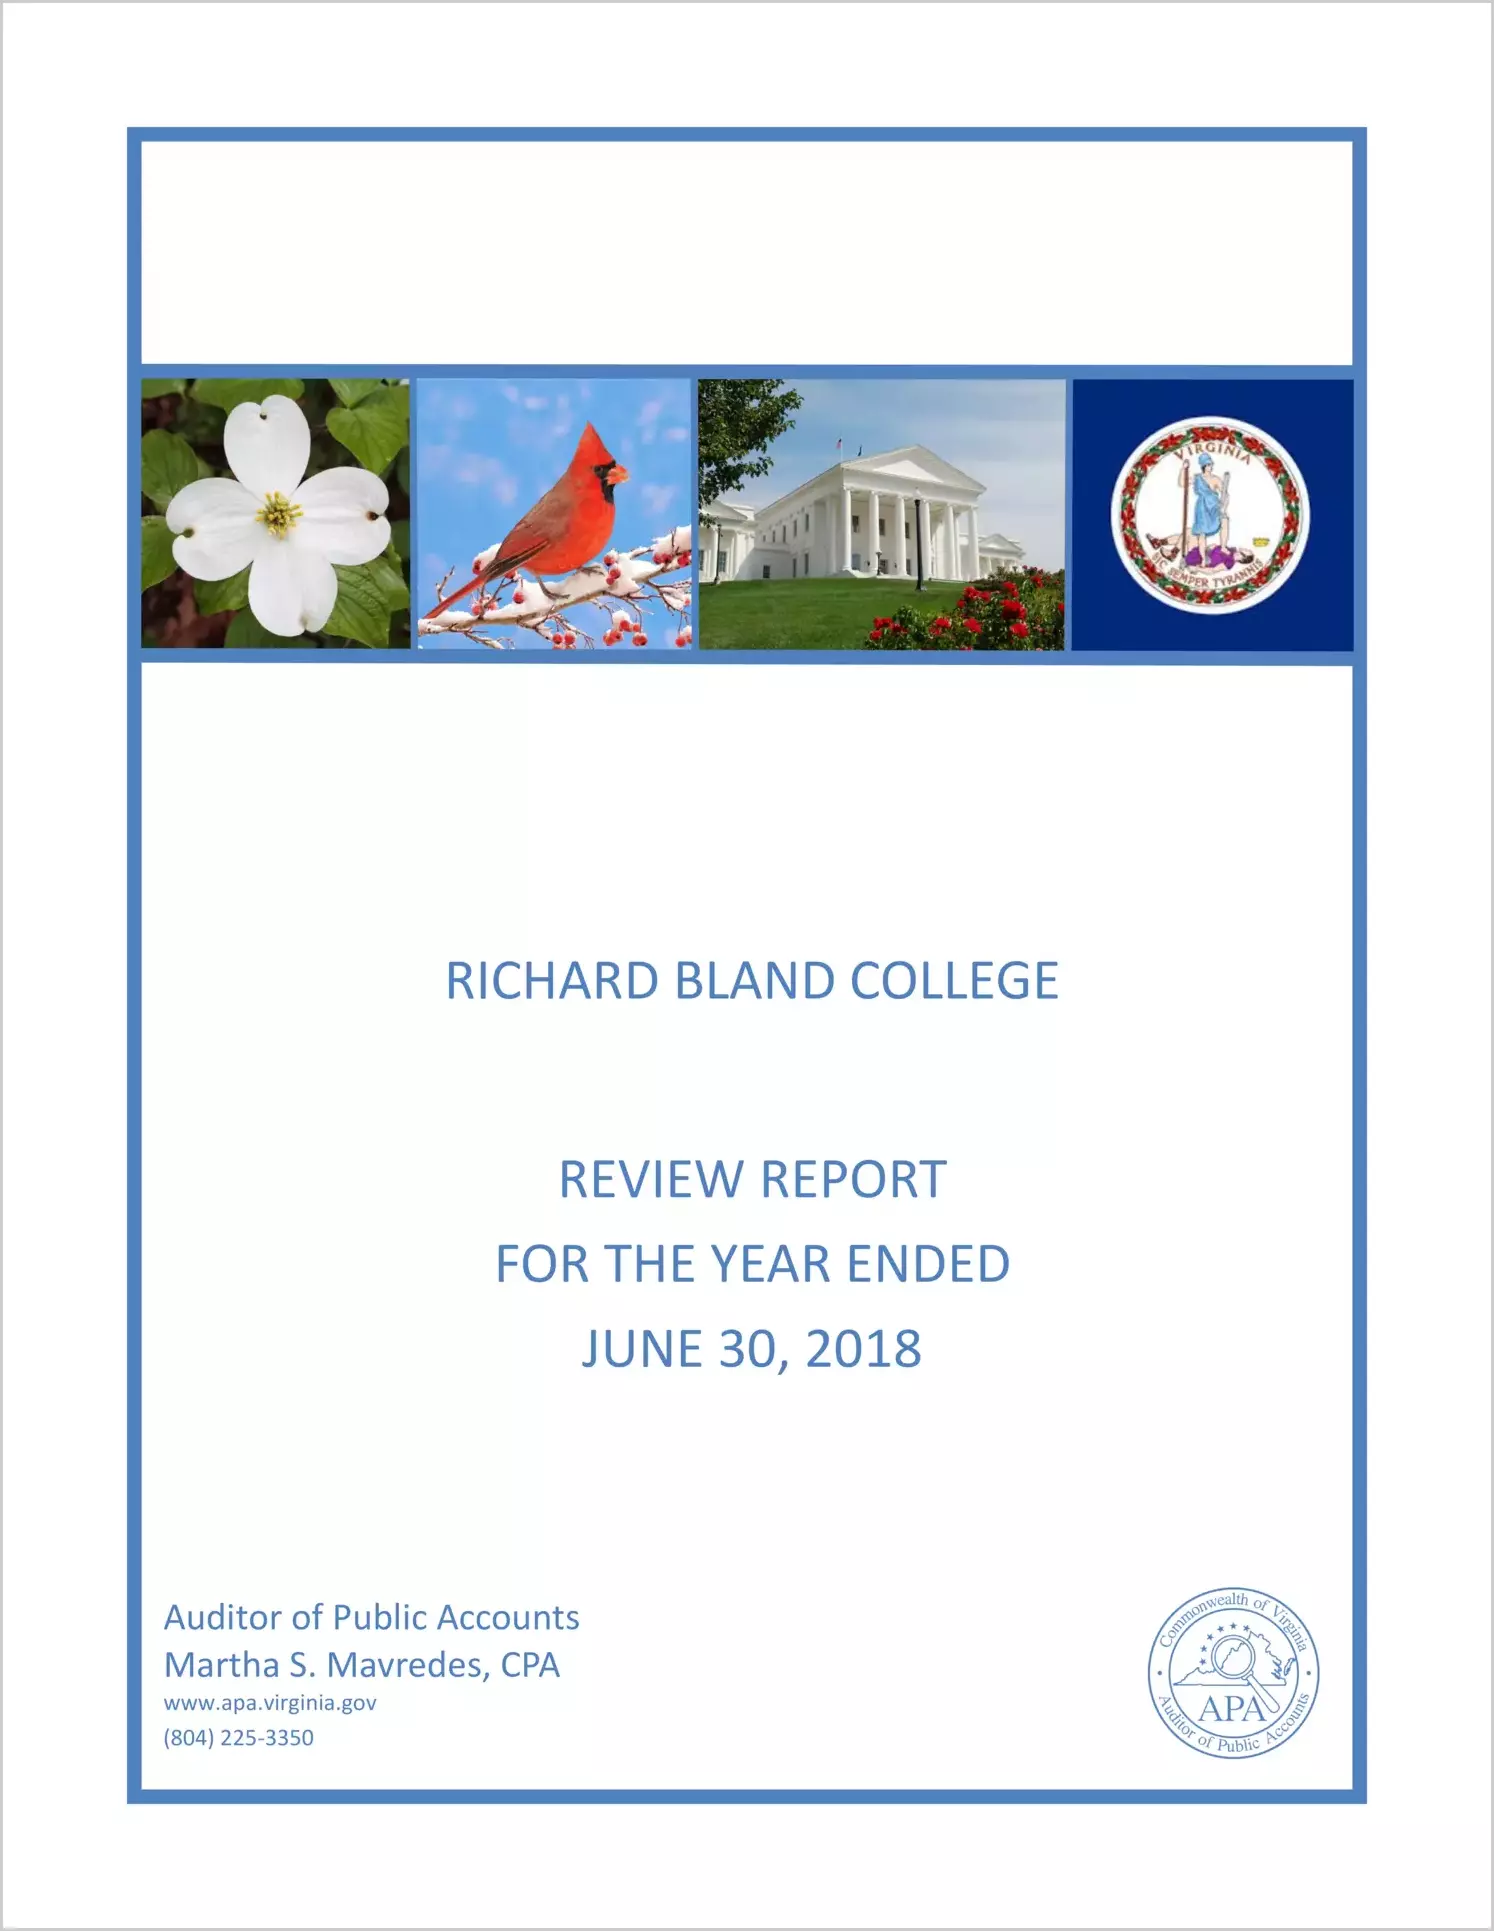 Richard Bland College Review for the year ended June 30, 2018